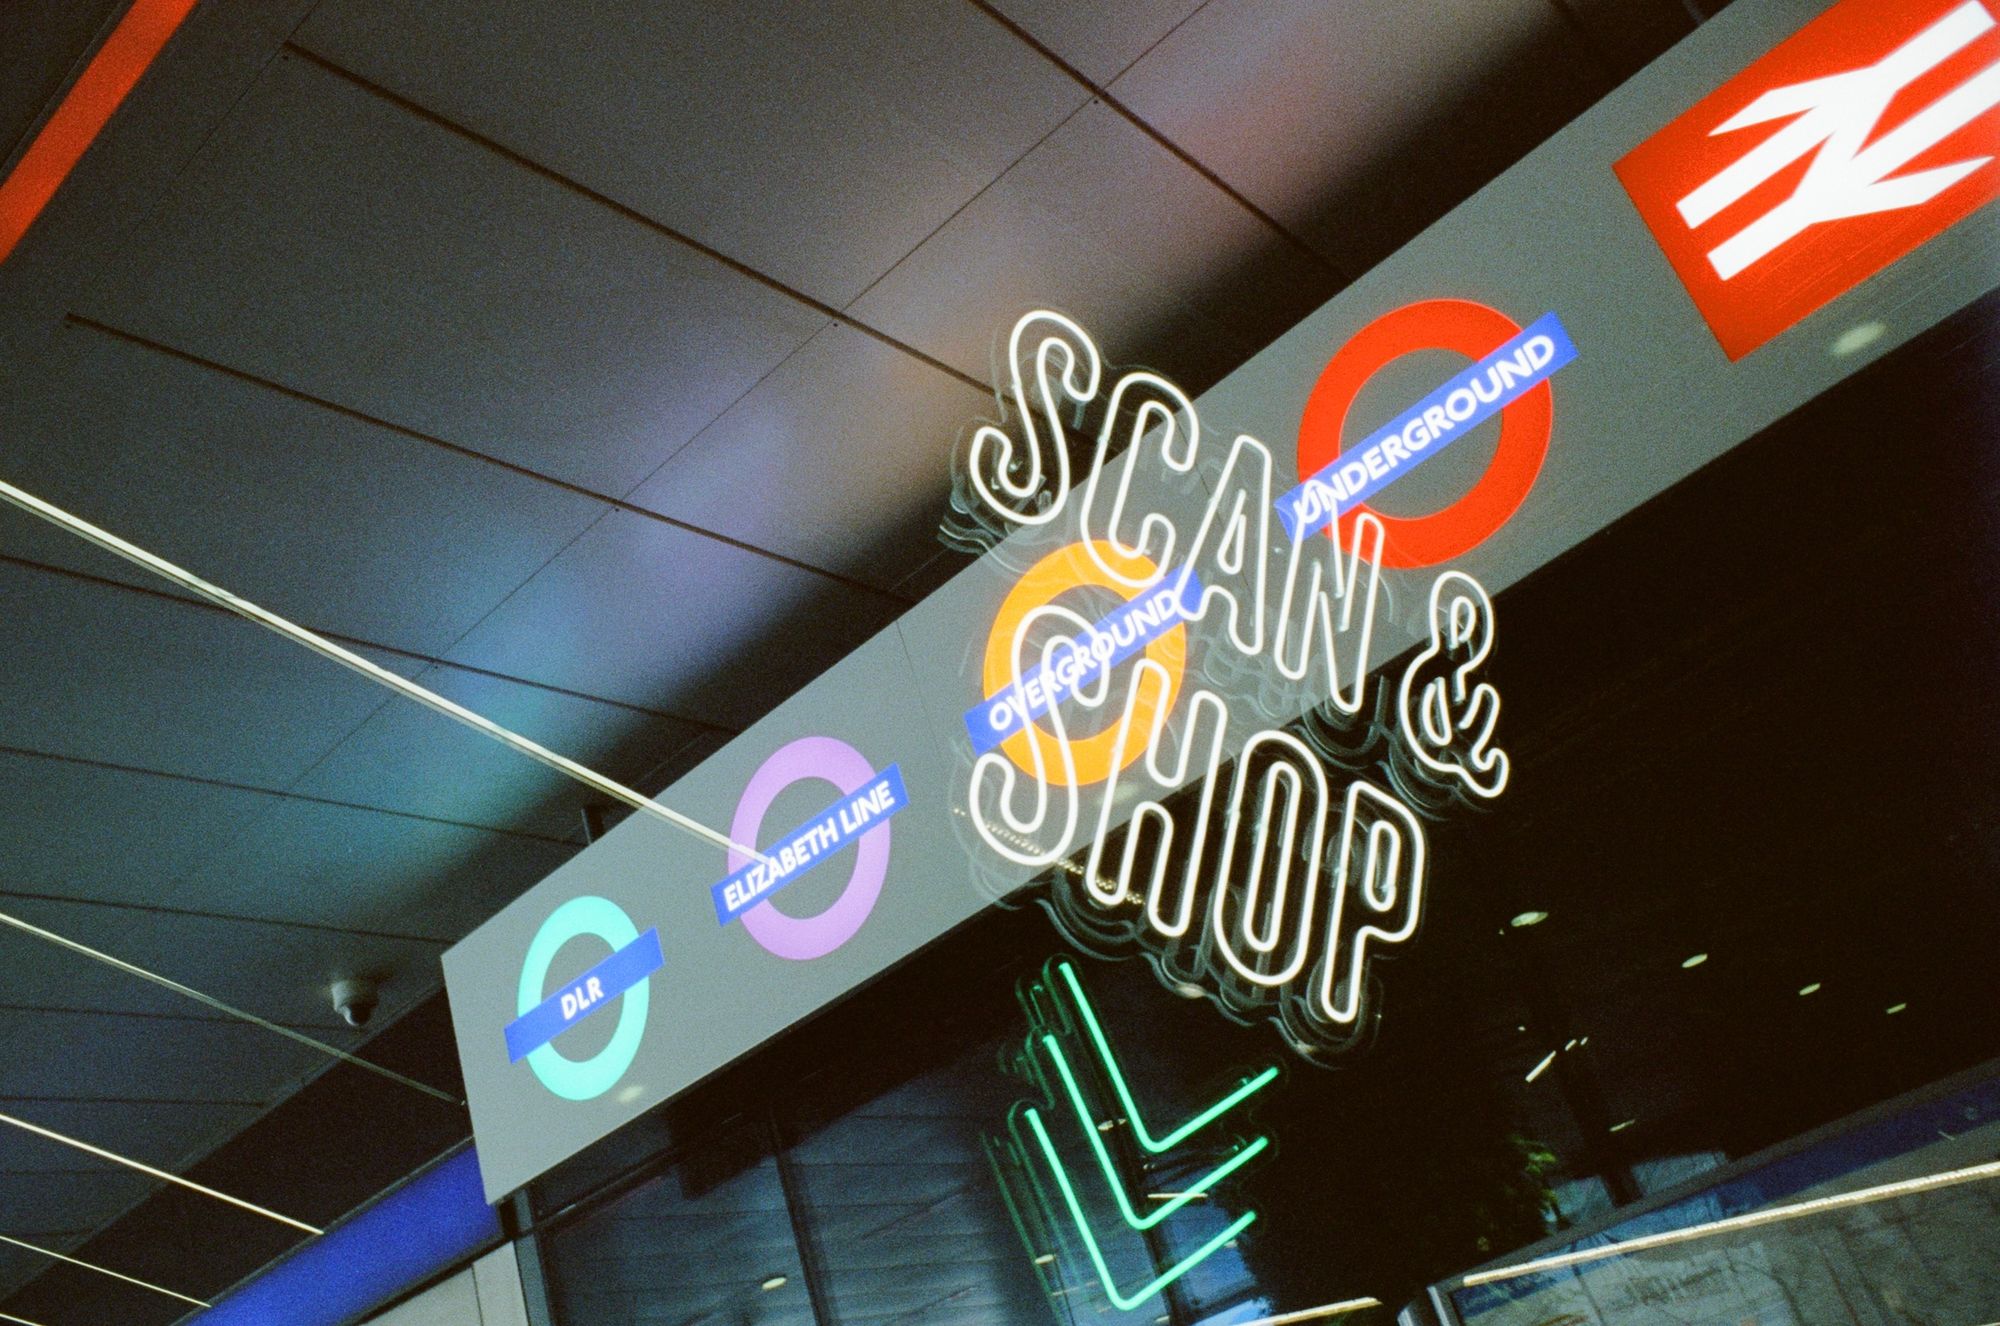 An illuminated station sign with roundels for DLR, Elizabeth Line, Overground, Underground, and British Rail. Exposed over the top: the words "SCAN AND SHOP" in neon lettering.